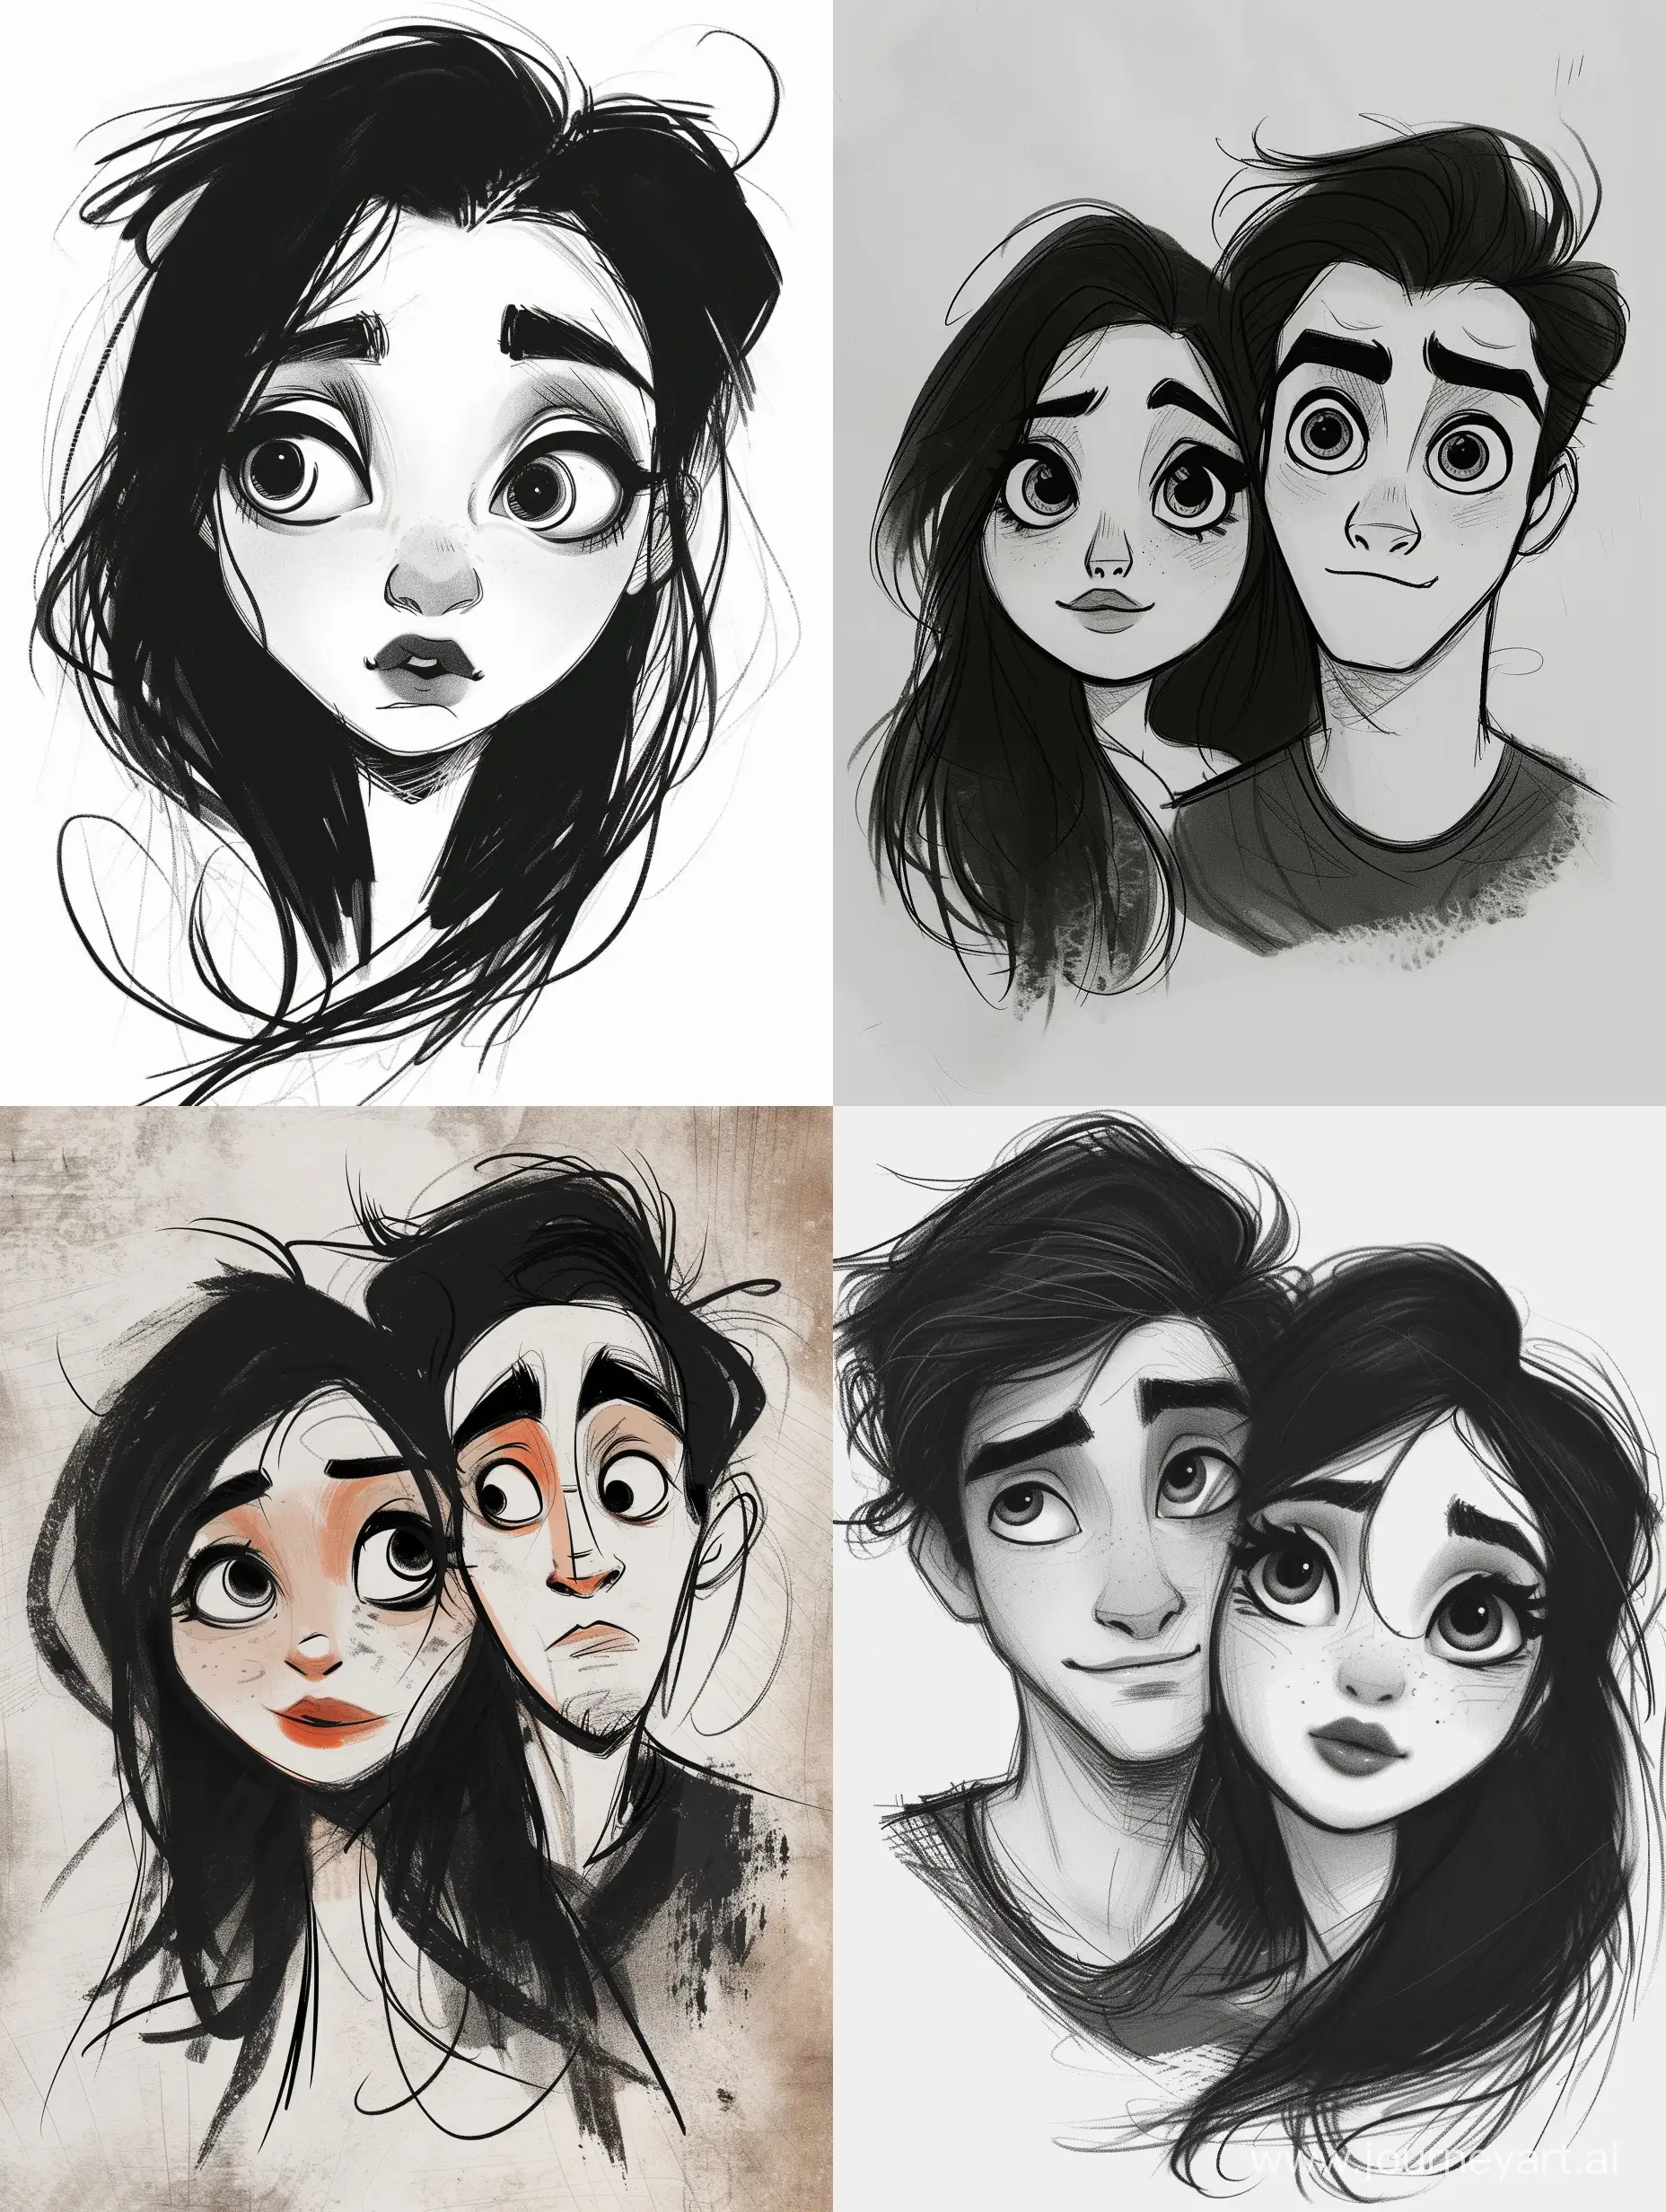 an Bangladeshi couple, sketched drawing, matisse style, the girl Bangladeshi has beautiful eyes and her hair is long length, her hair is black and cool style, her nose is big and wide, a single eyebrow, wider lips, oval face shape in 4k quality, girl is cute vibes with sexy eyes and beautiful